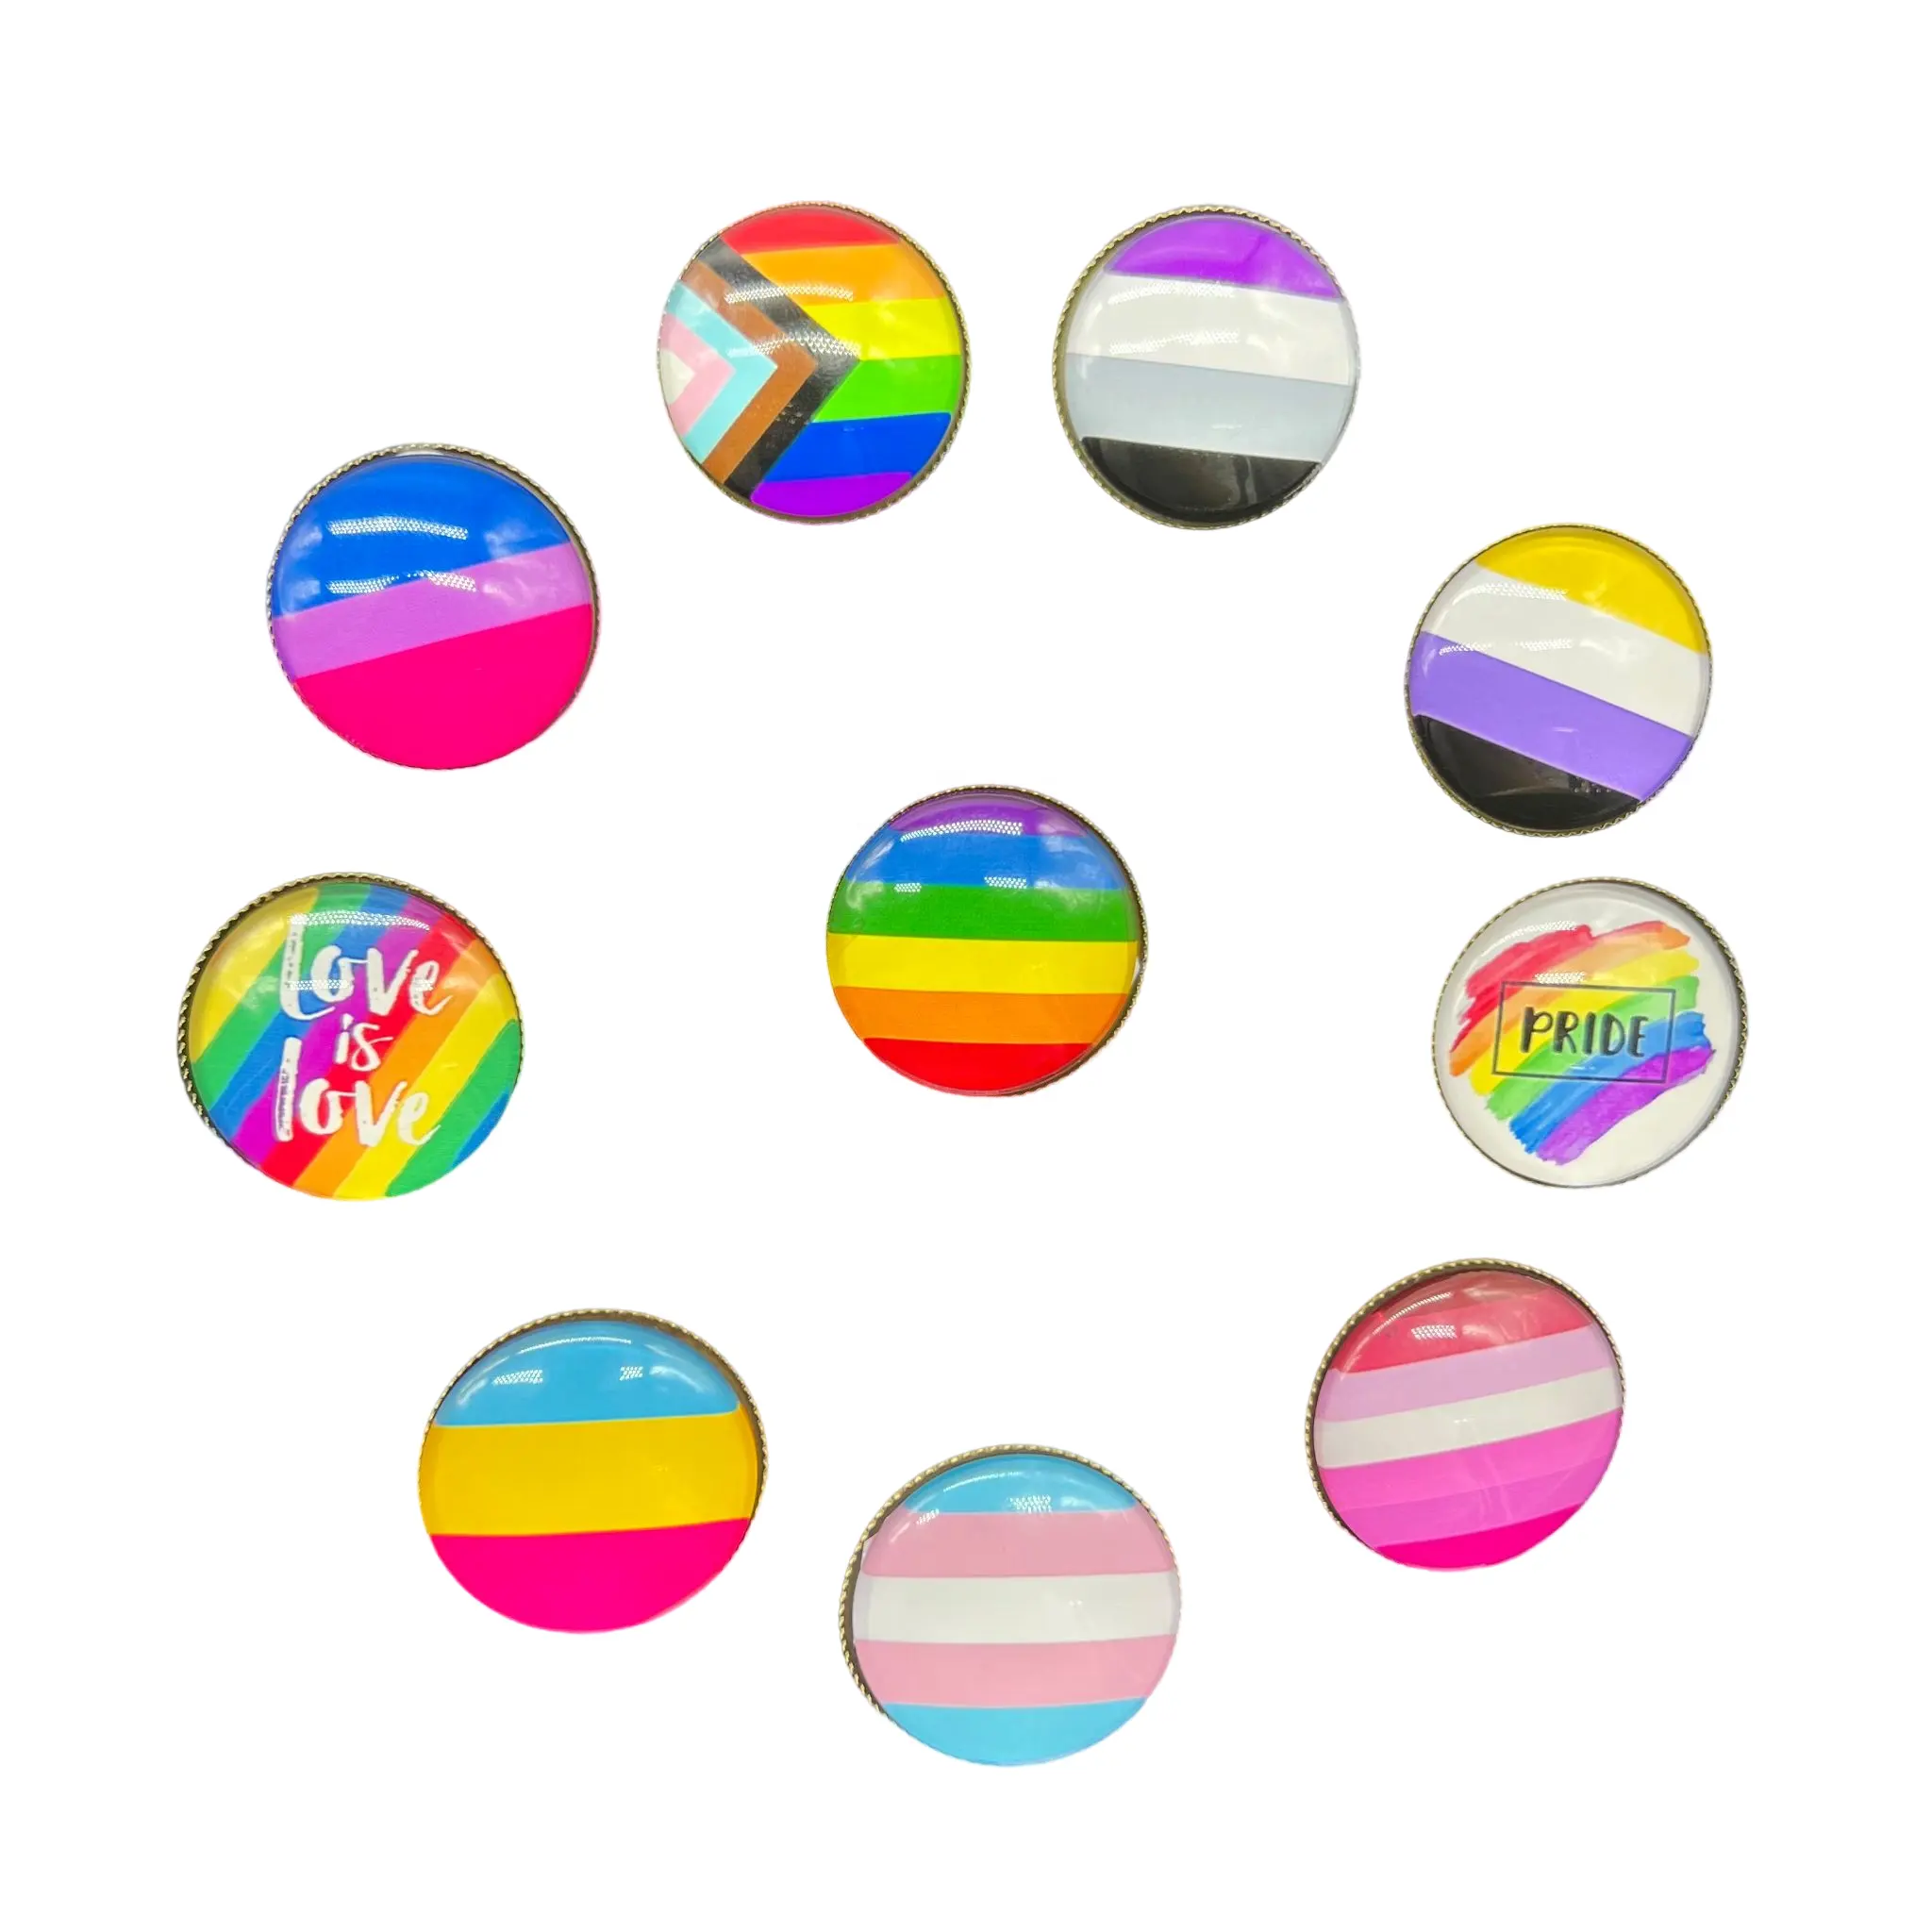 LGBT Gay Flag Pride Rainbow Round Brooch Button Lapel Pin for Hat Shirt Clothing Bag Accessories